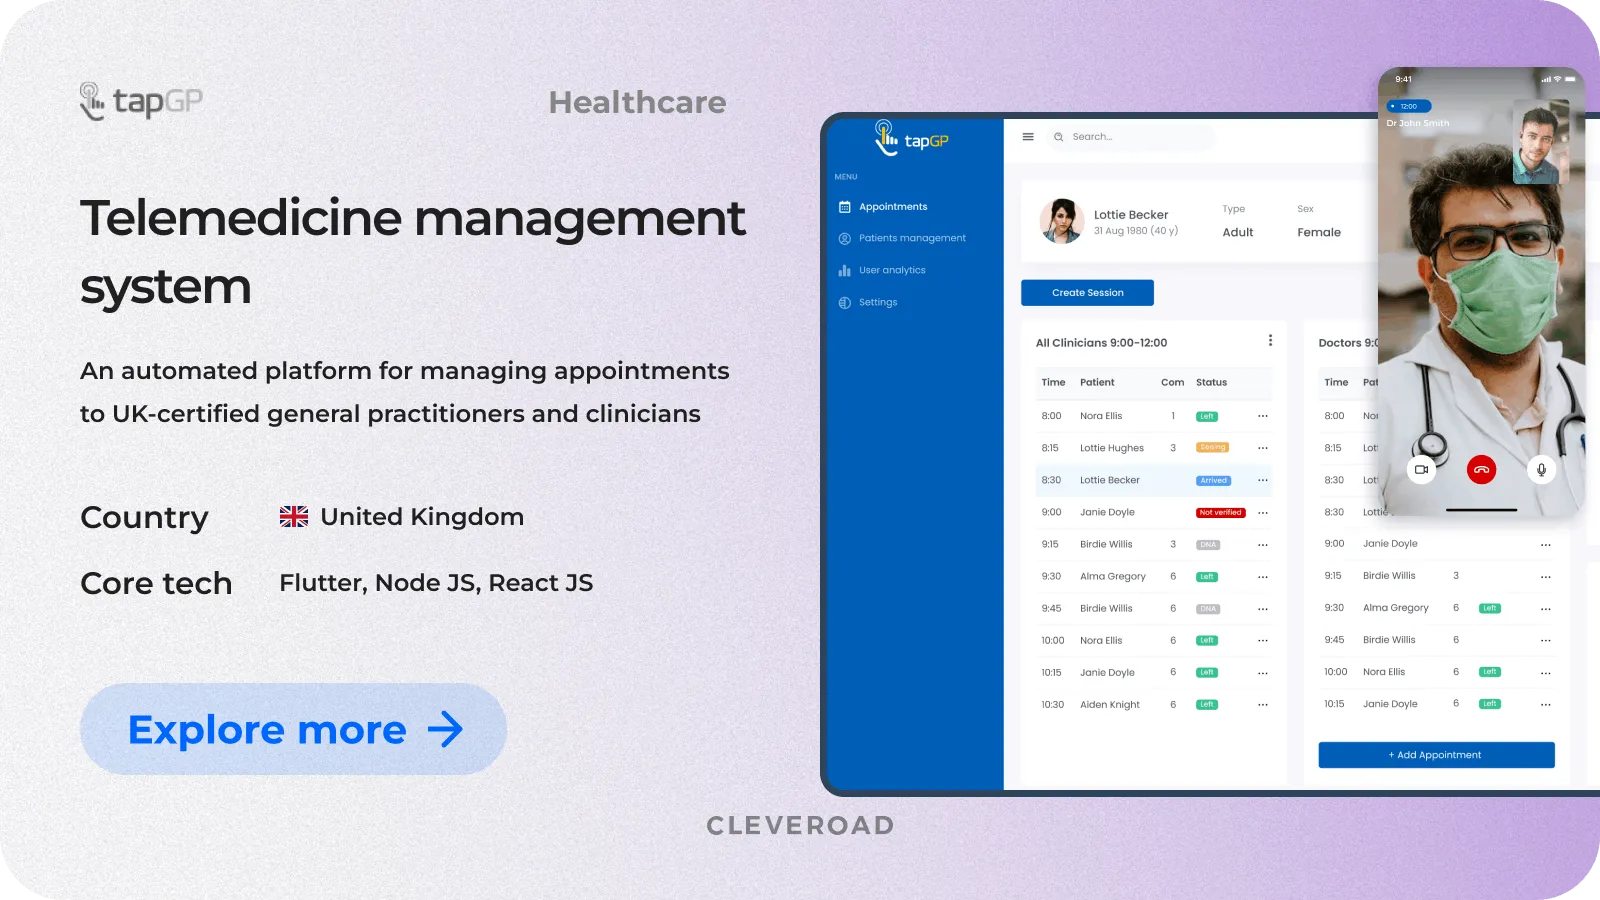 TapGP telemedicine from Cleveroad